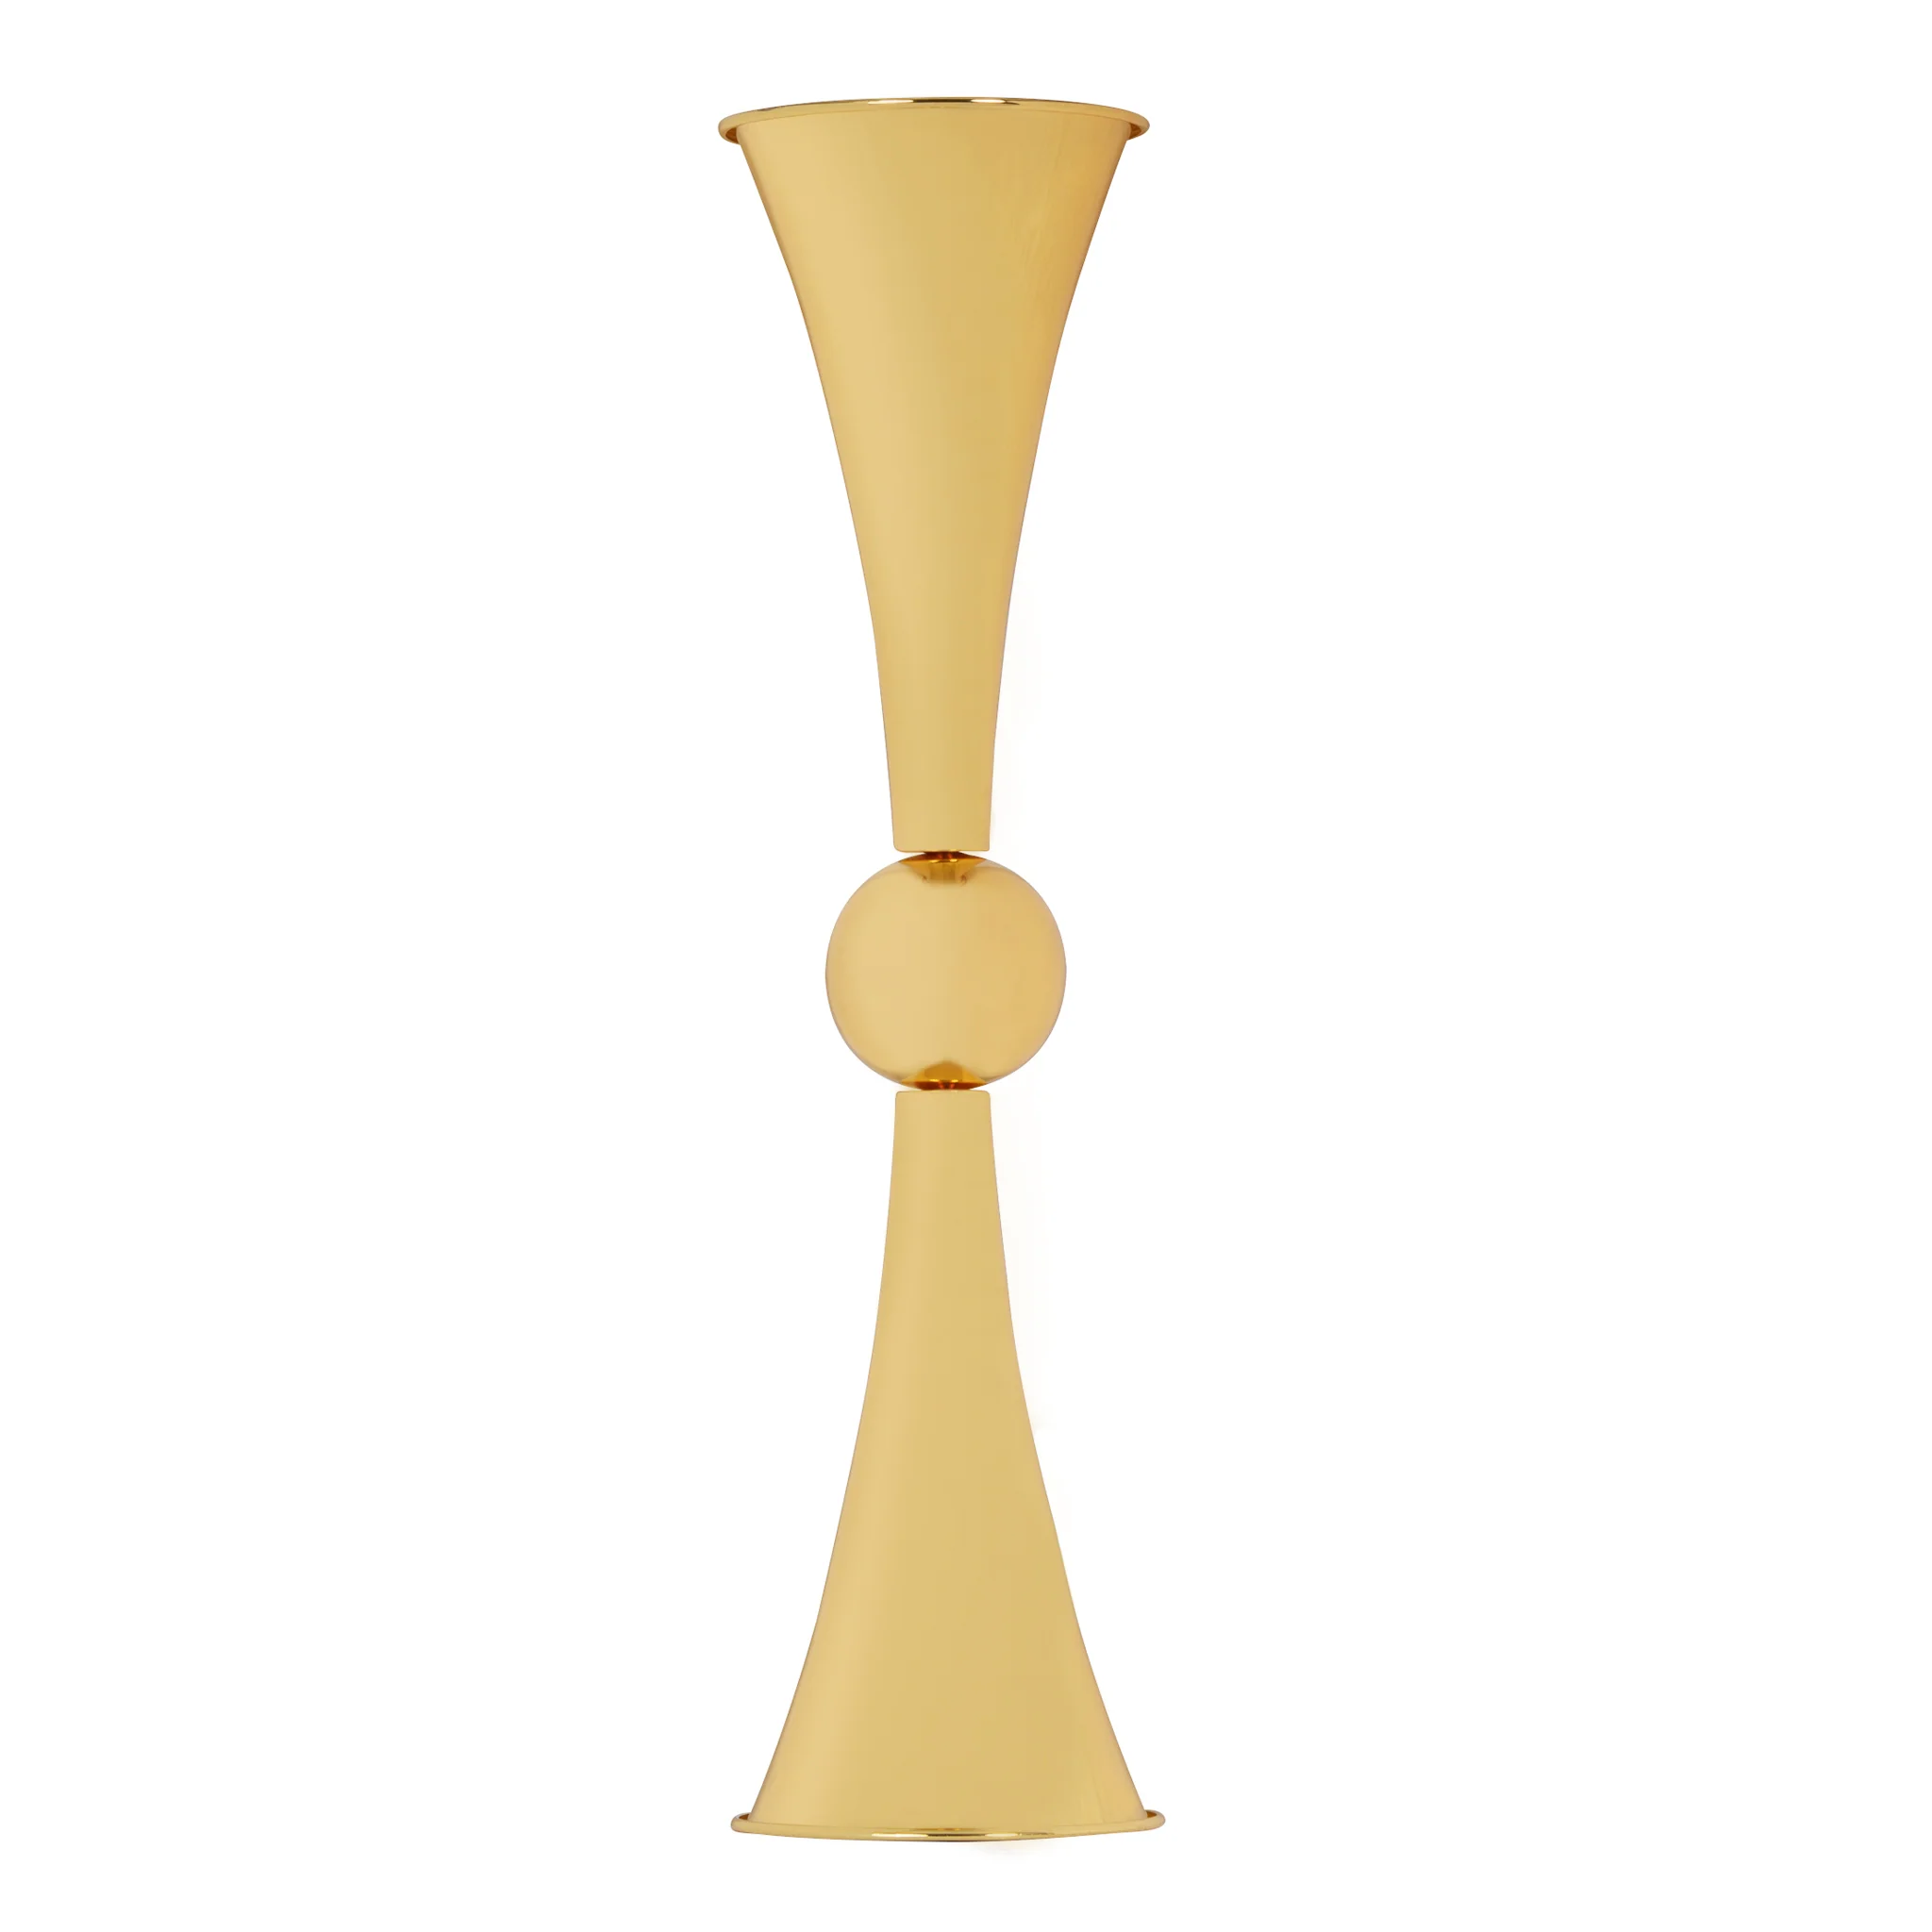 This golden vase is the perfect addition to your wedding table setting. At 28 inches tall, it&